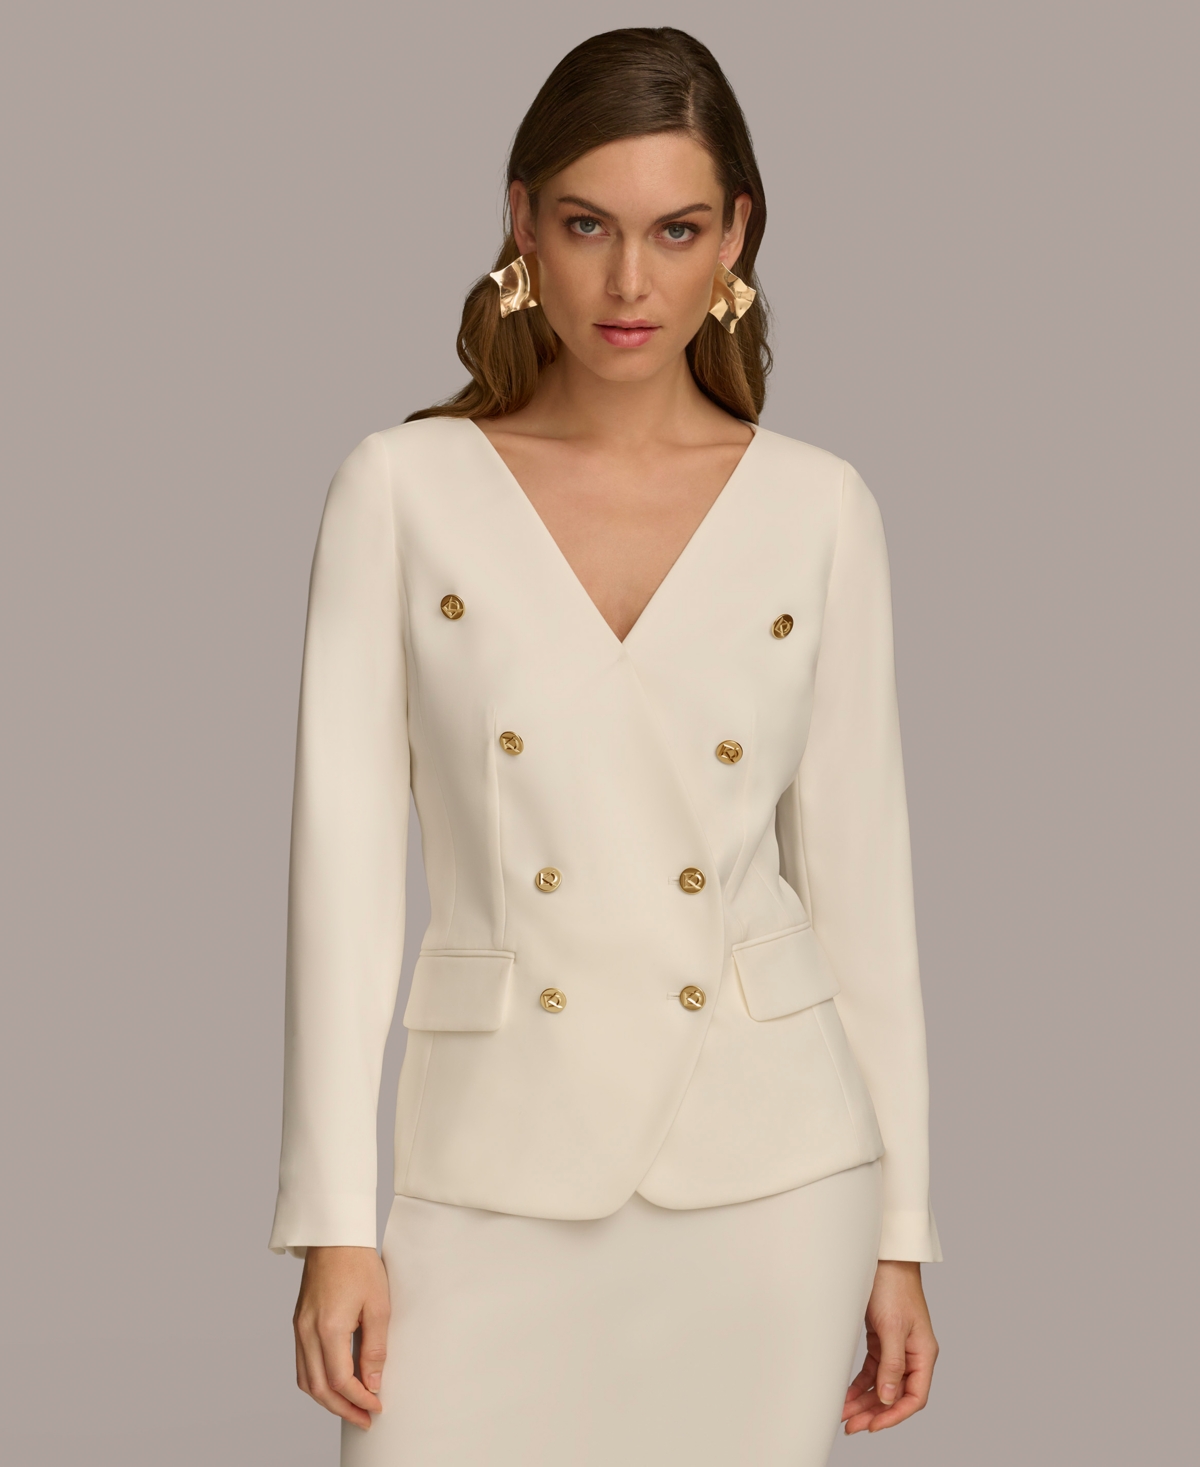 Women's Collarless Double-Breasted Jacket - Cream